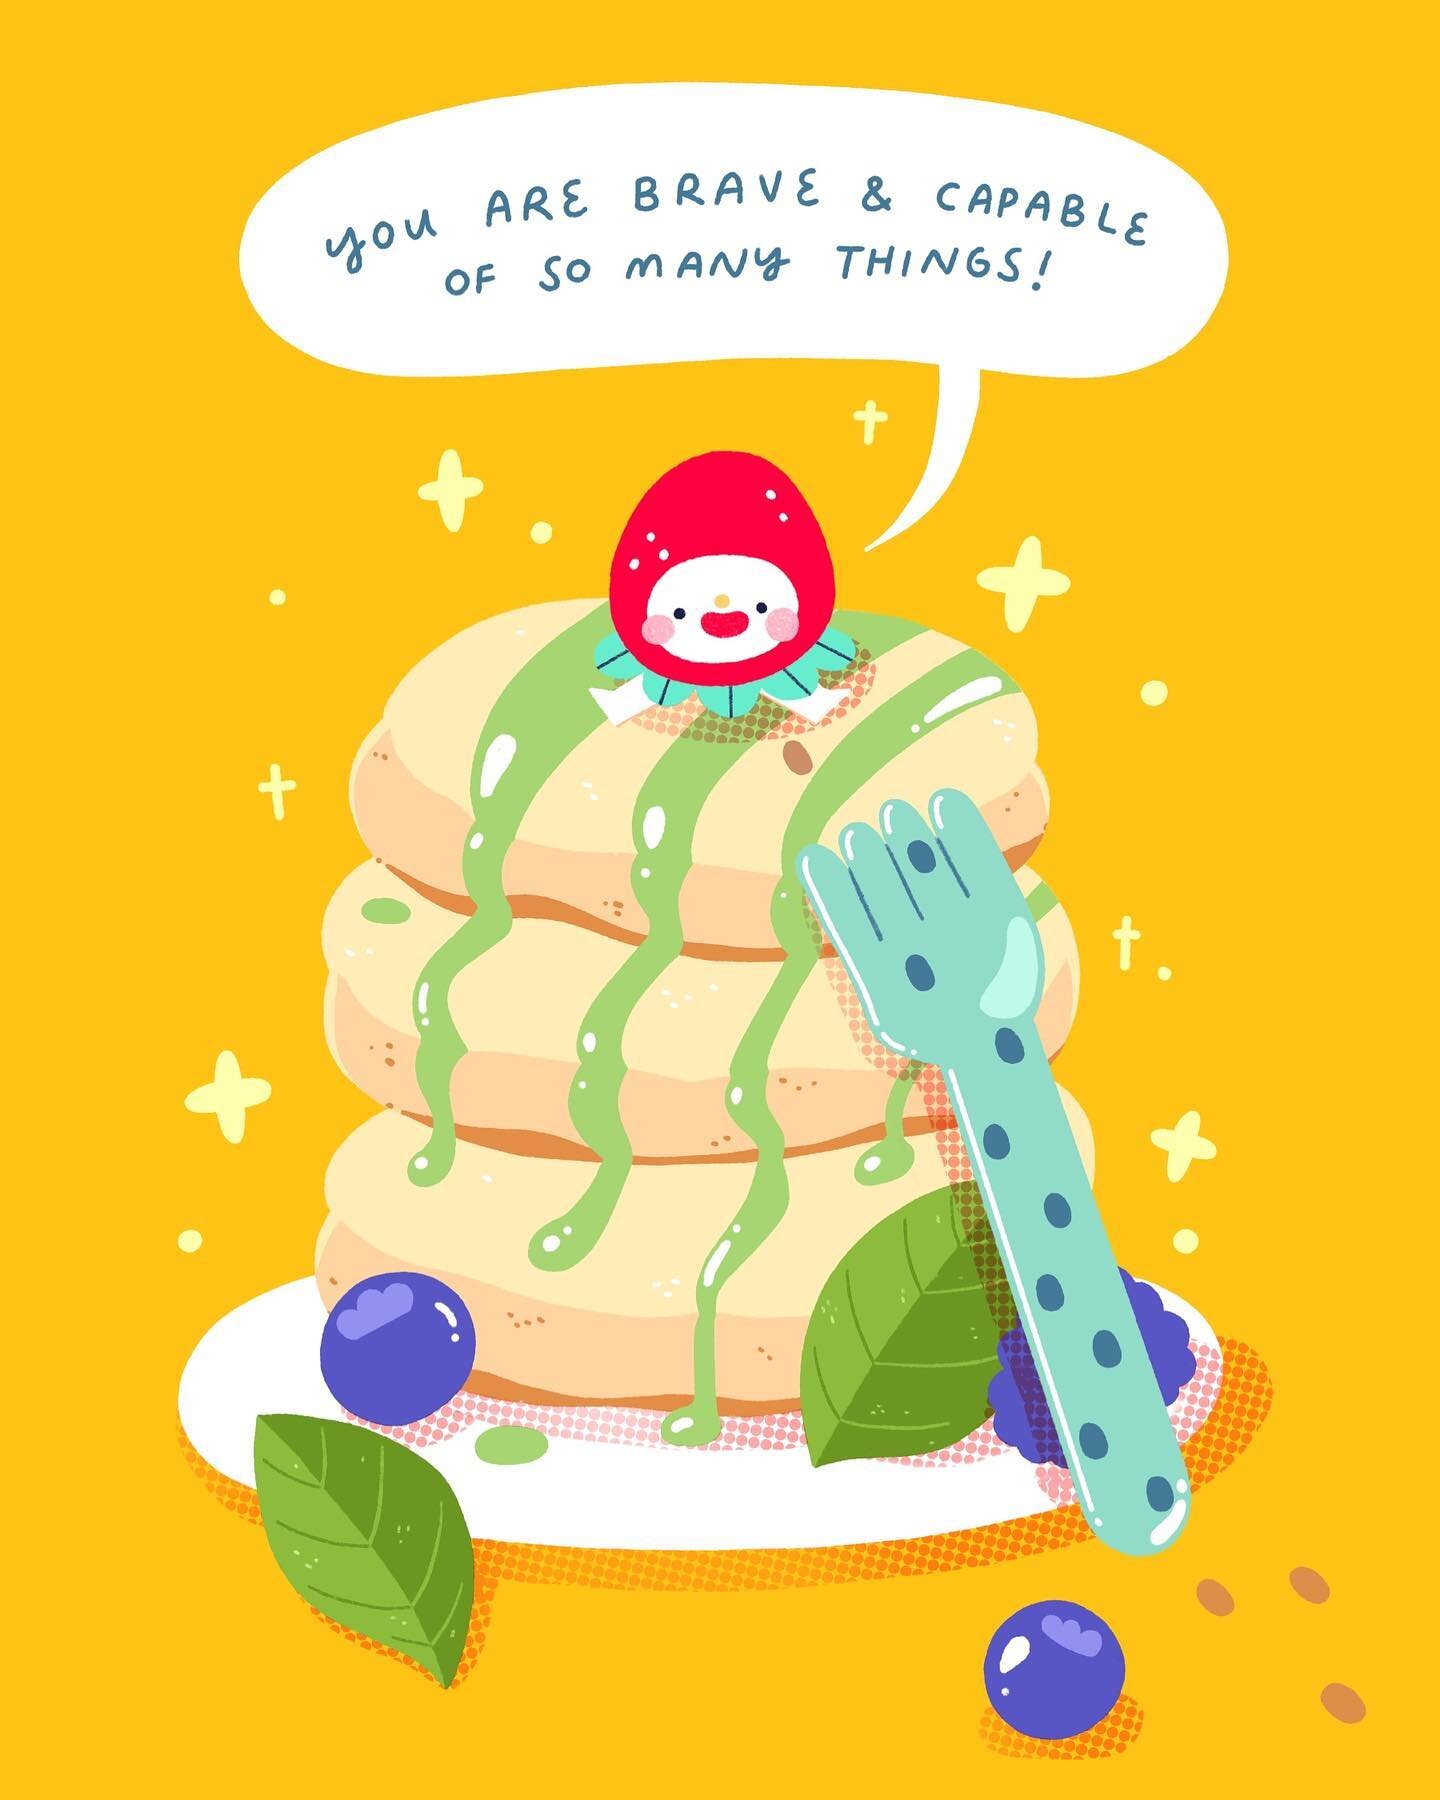 This is something I had to learn to tell myself as an adult because I wasn&rsquo;t used to hearing this growing up. Remember that no matter what other people say, you are capable!! 🍓🥞🍴
〰
If you haven&rsquo;t subscribed yet to get a these prints, @